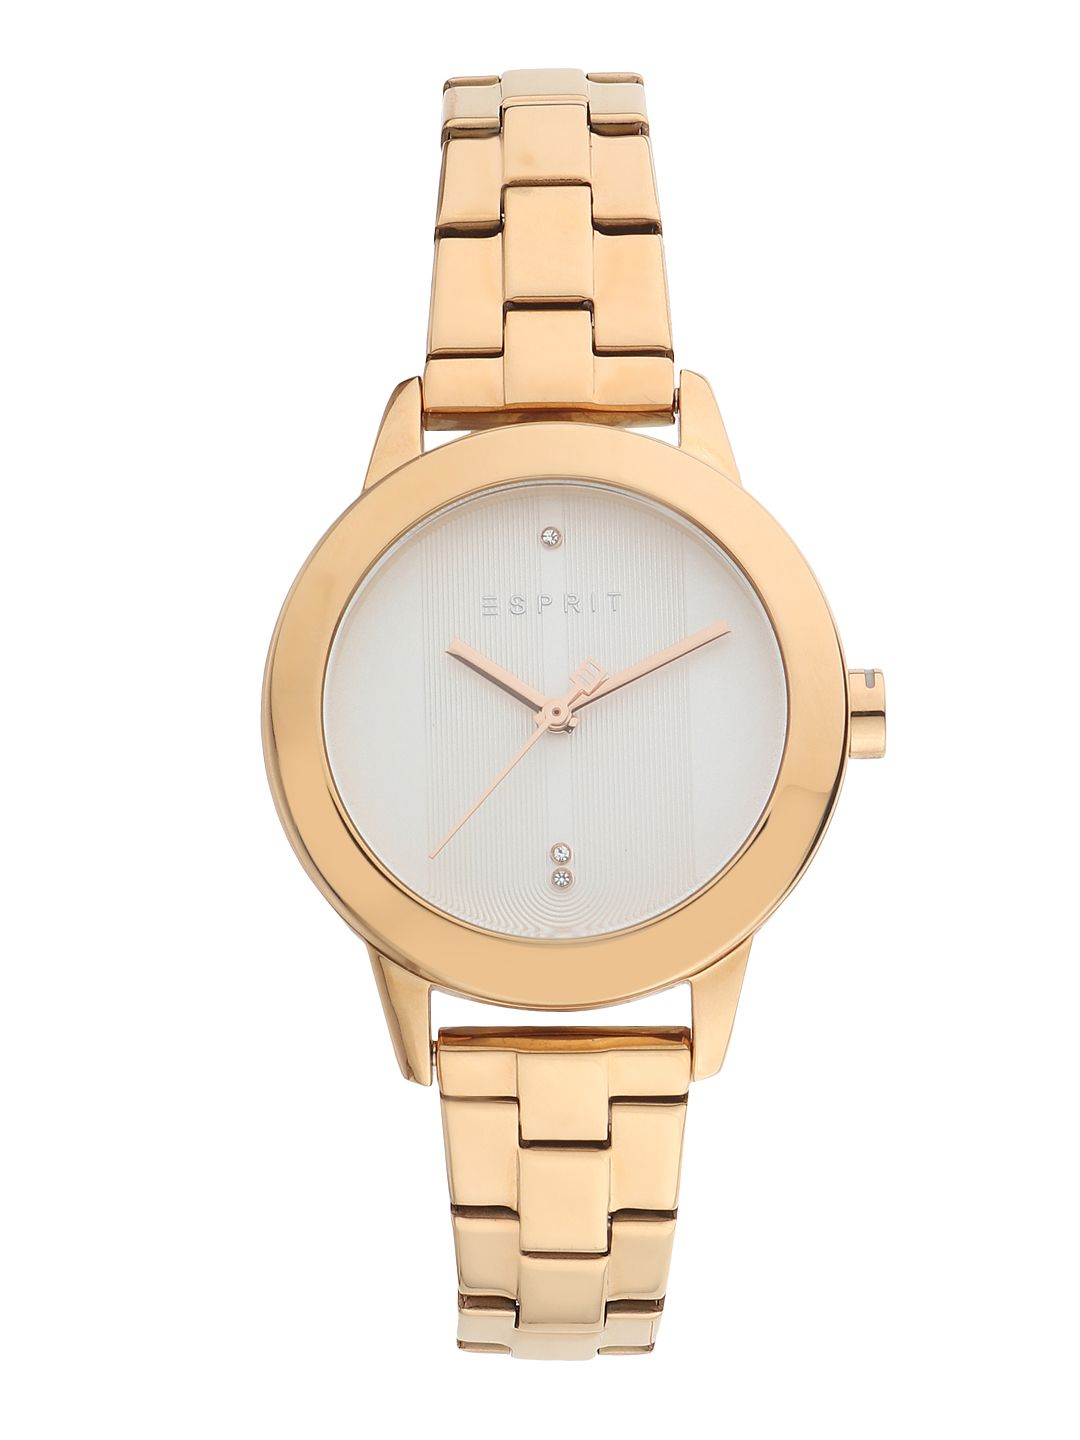 ESPRIT Women Off-White Solid Analogue Watch ES1L105M0295 Price in India